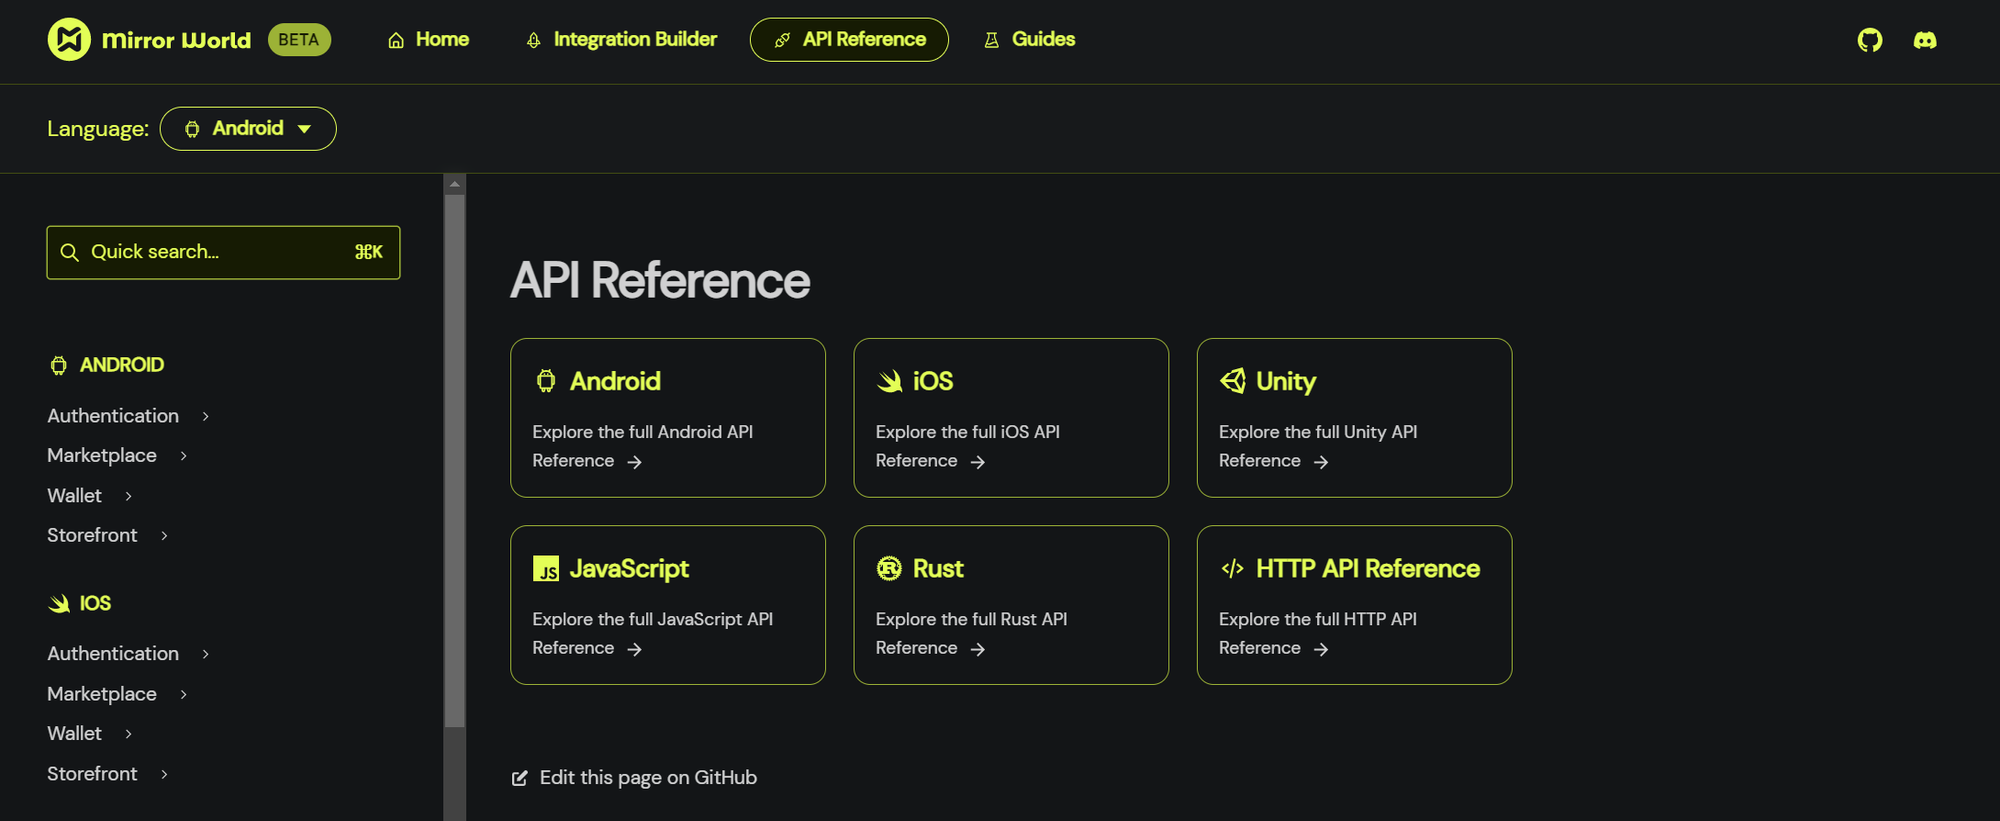 Check out our API reference on different platforms!